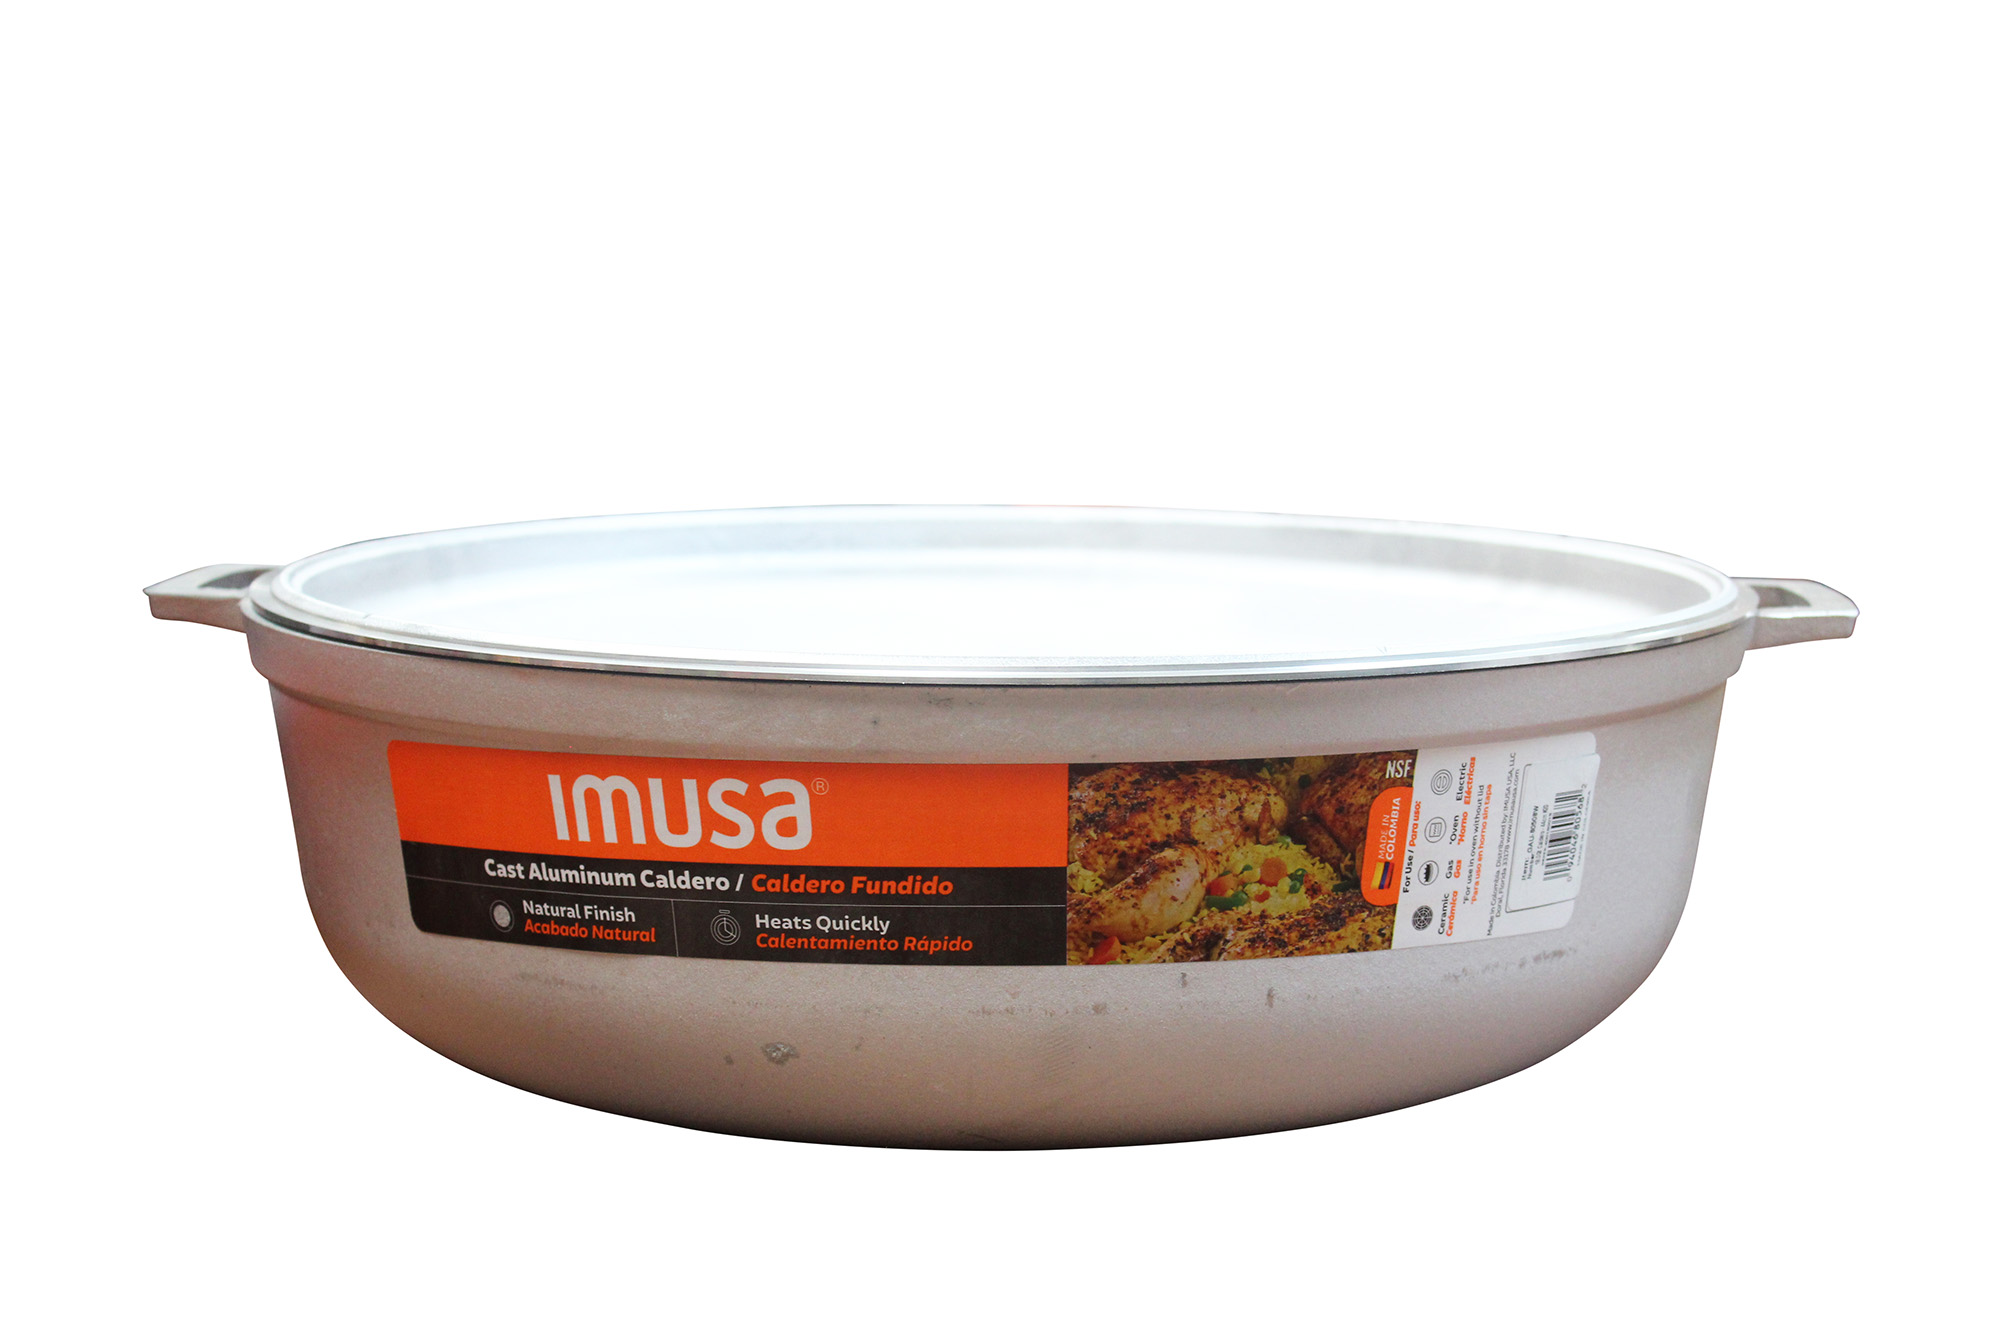 Imusa 11.6 Quart Cast Aluminum Traditional Colombian Caldero or Dutch Oven with Lid - image 3 of 12